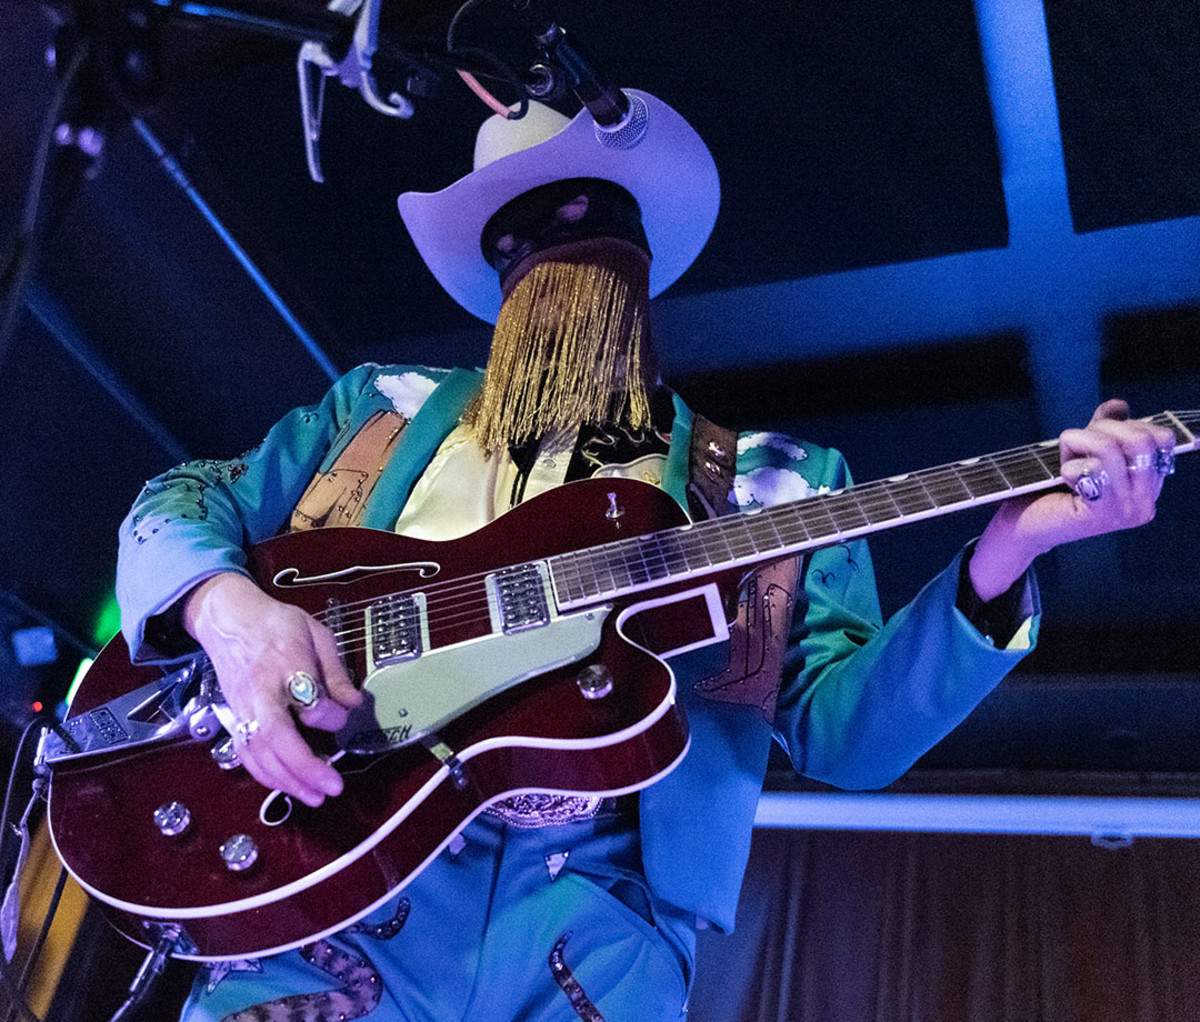 Orville Peck performs live on stage at Barboza on May 18, 2019 in Seattle, Washington.